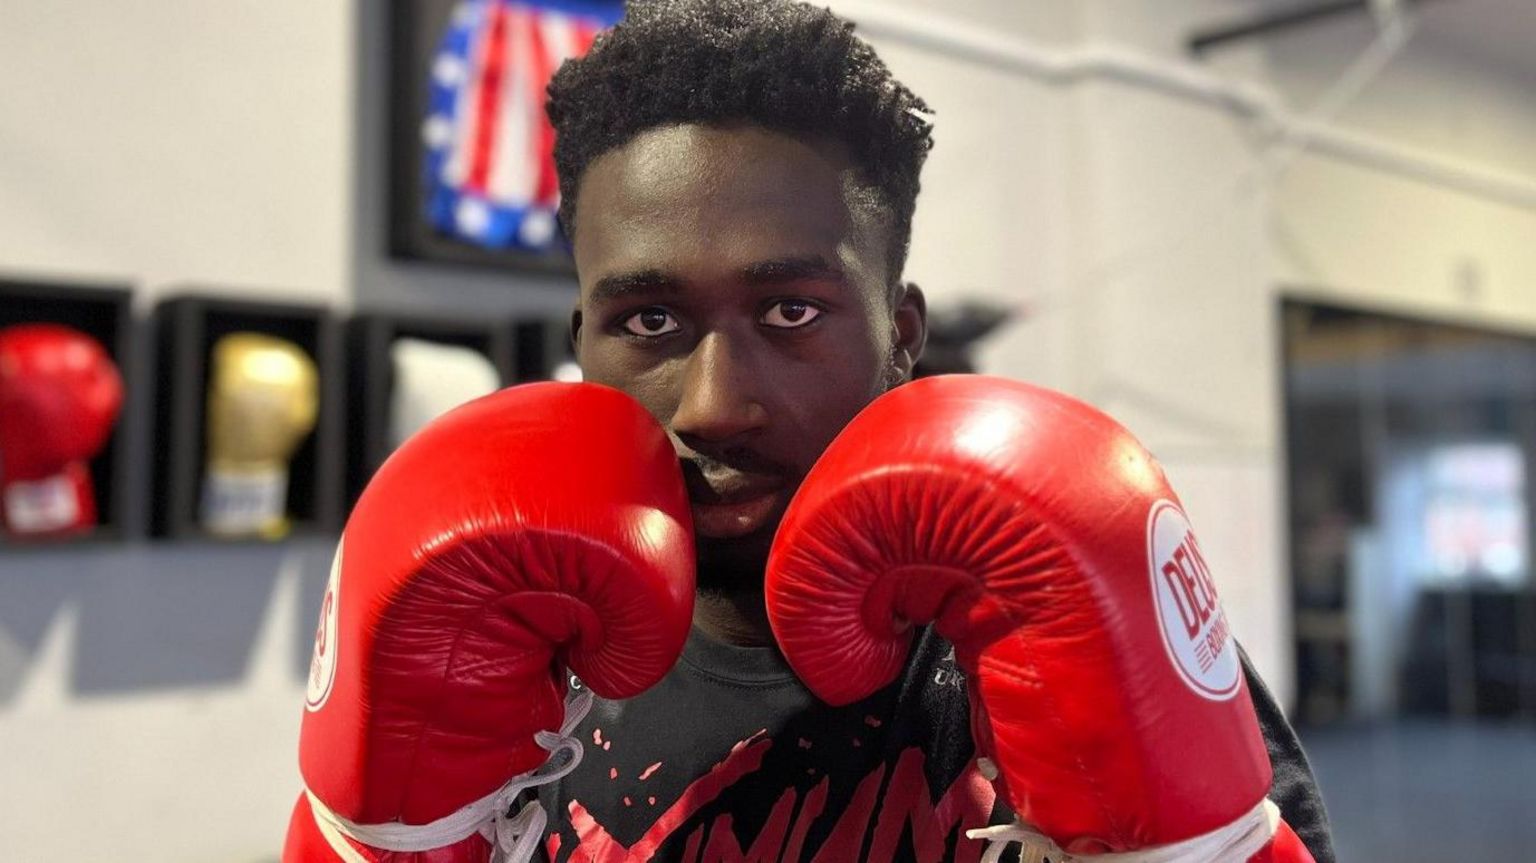 Boxing prospect Adam Olaore holds his red boxing gloves in front of his face in a defensive pose